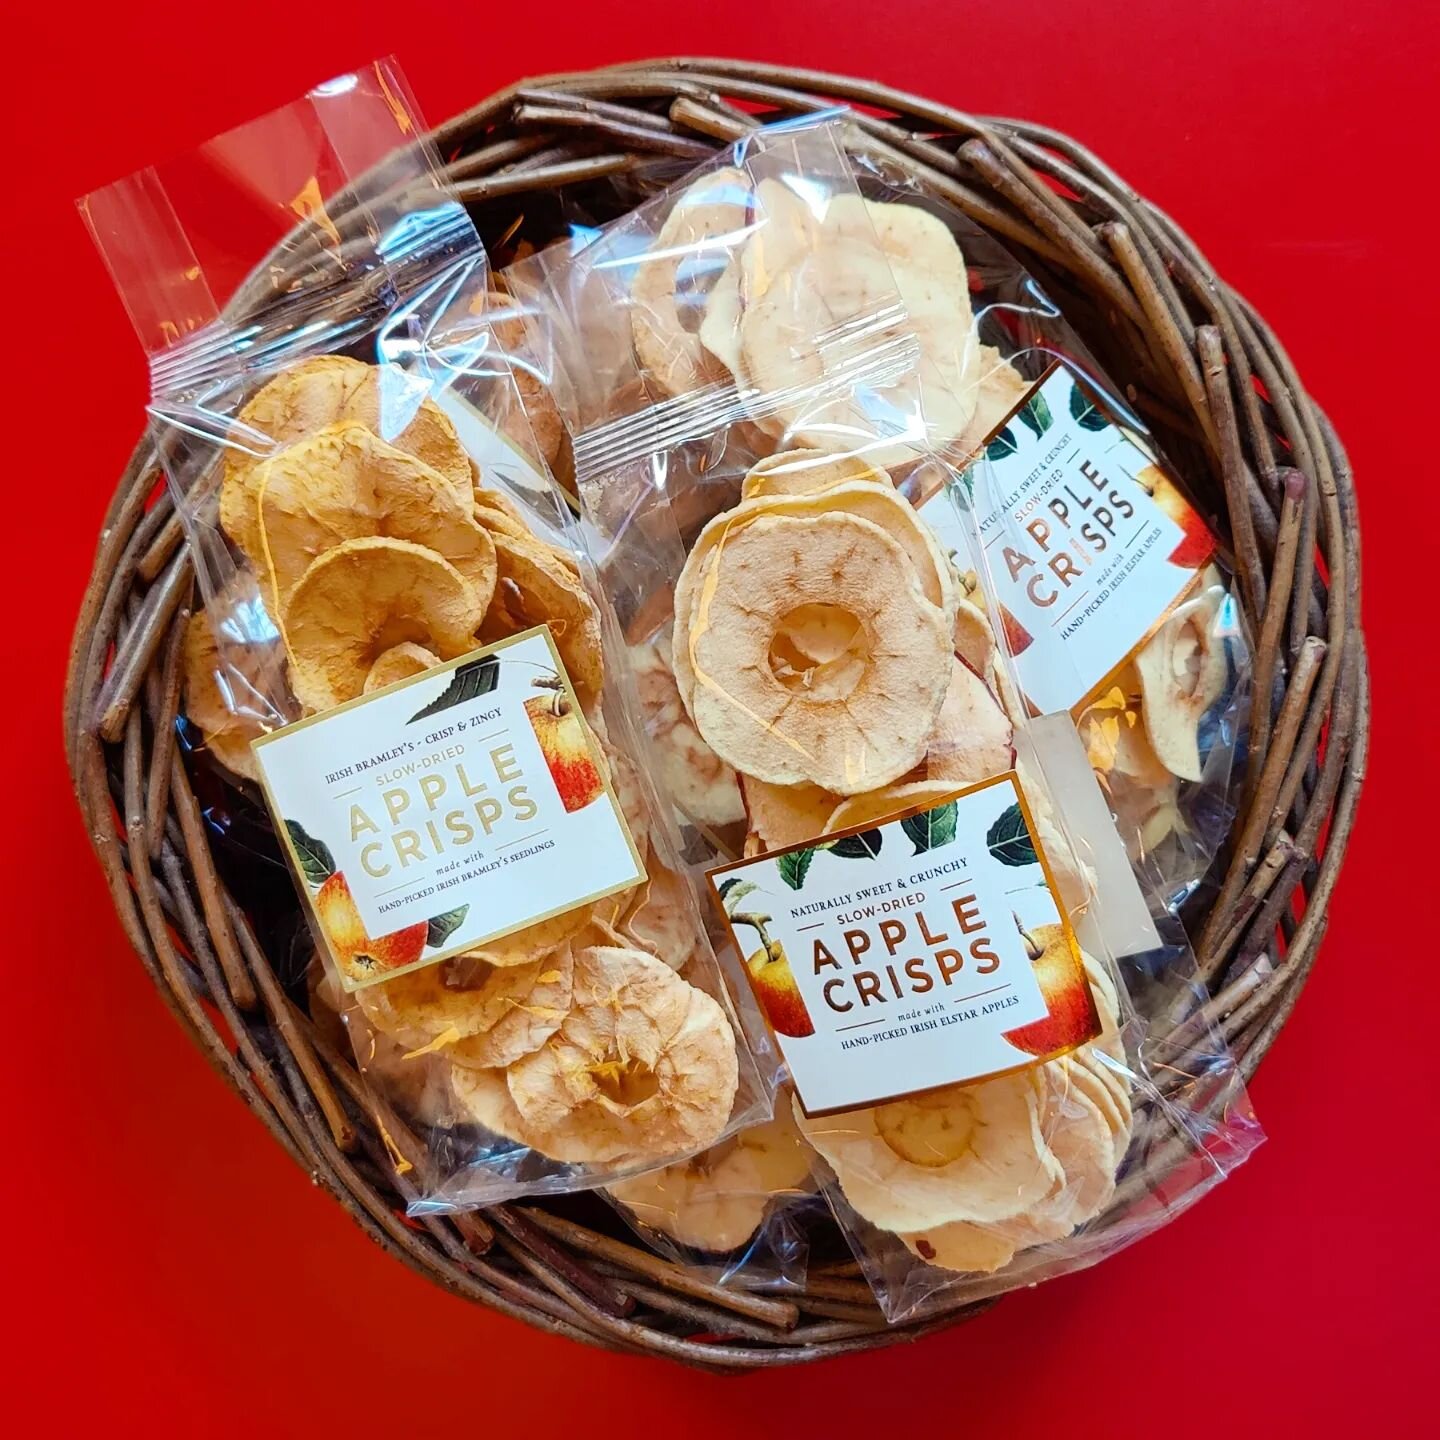 APPLE CRISPS 🍎🍏 Sweet Elstar or Zingy Bramley apple crisps from Con and the gang @theapplefarm in Tipperary. Perfect, crunchy addition to salads and sandwiches or for snacking on the run! 🤠